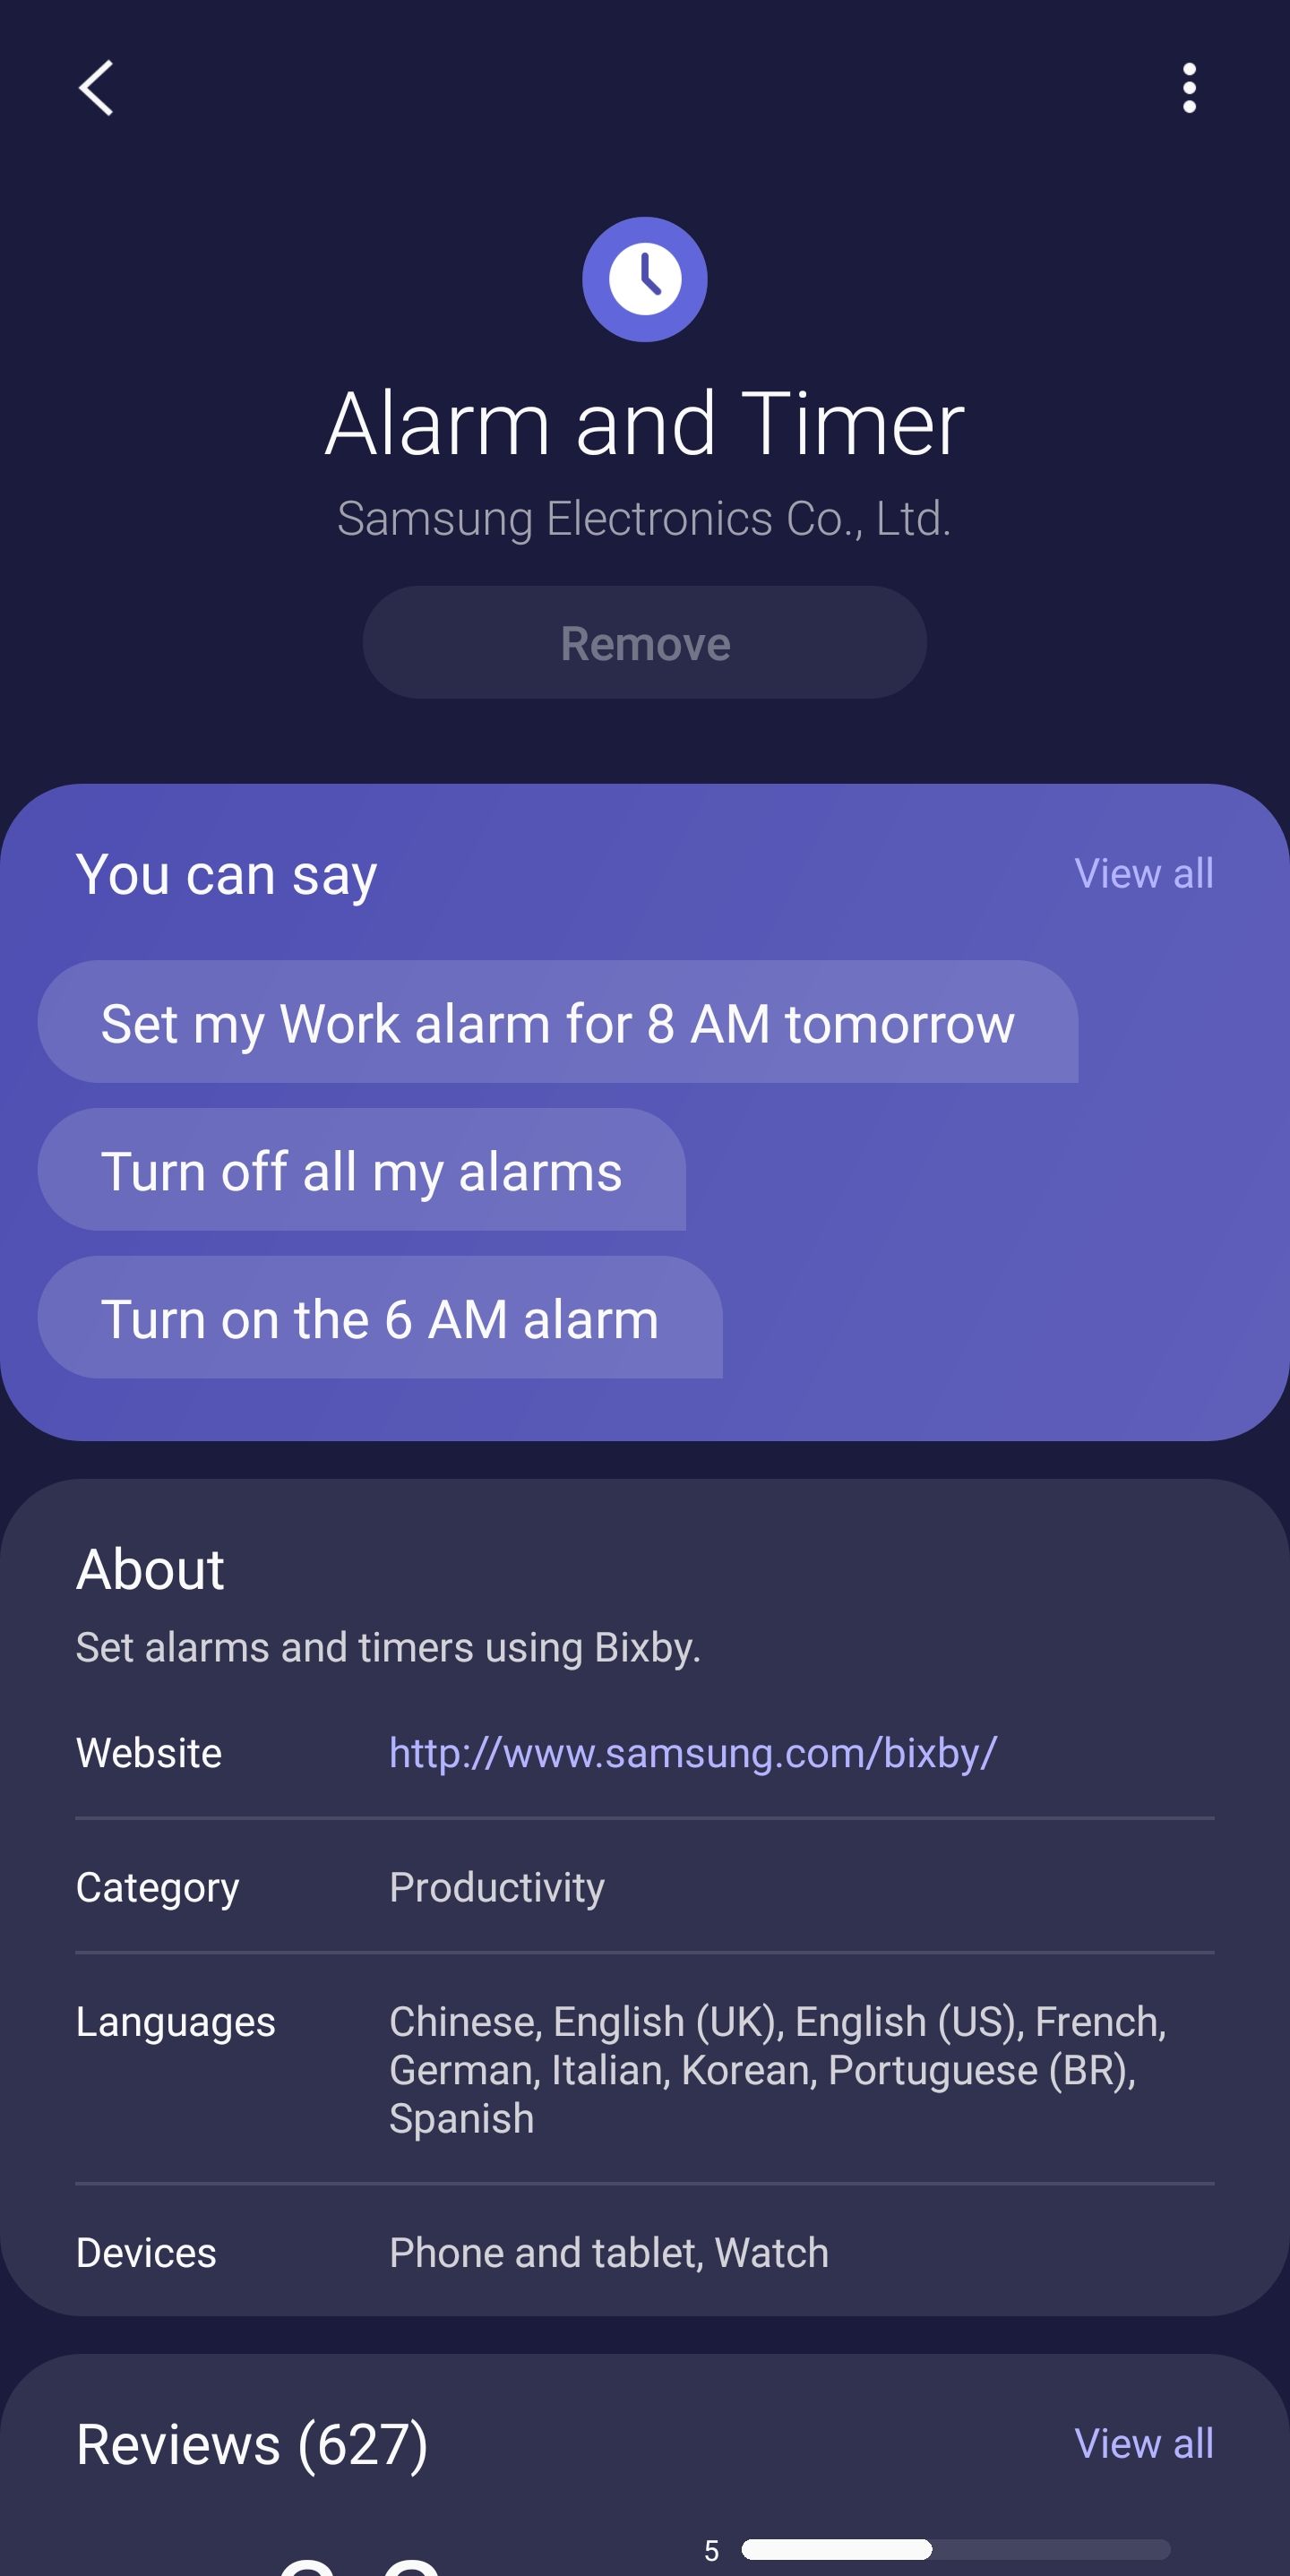 Can Bixby alarm be used with other alarm apps? - Samsung Community